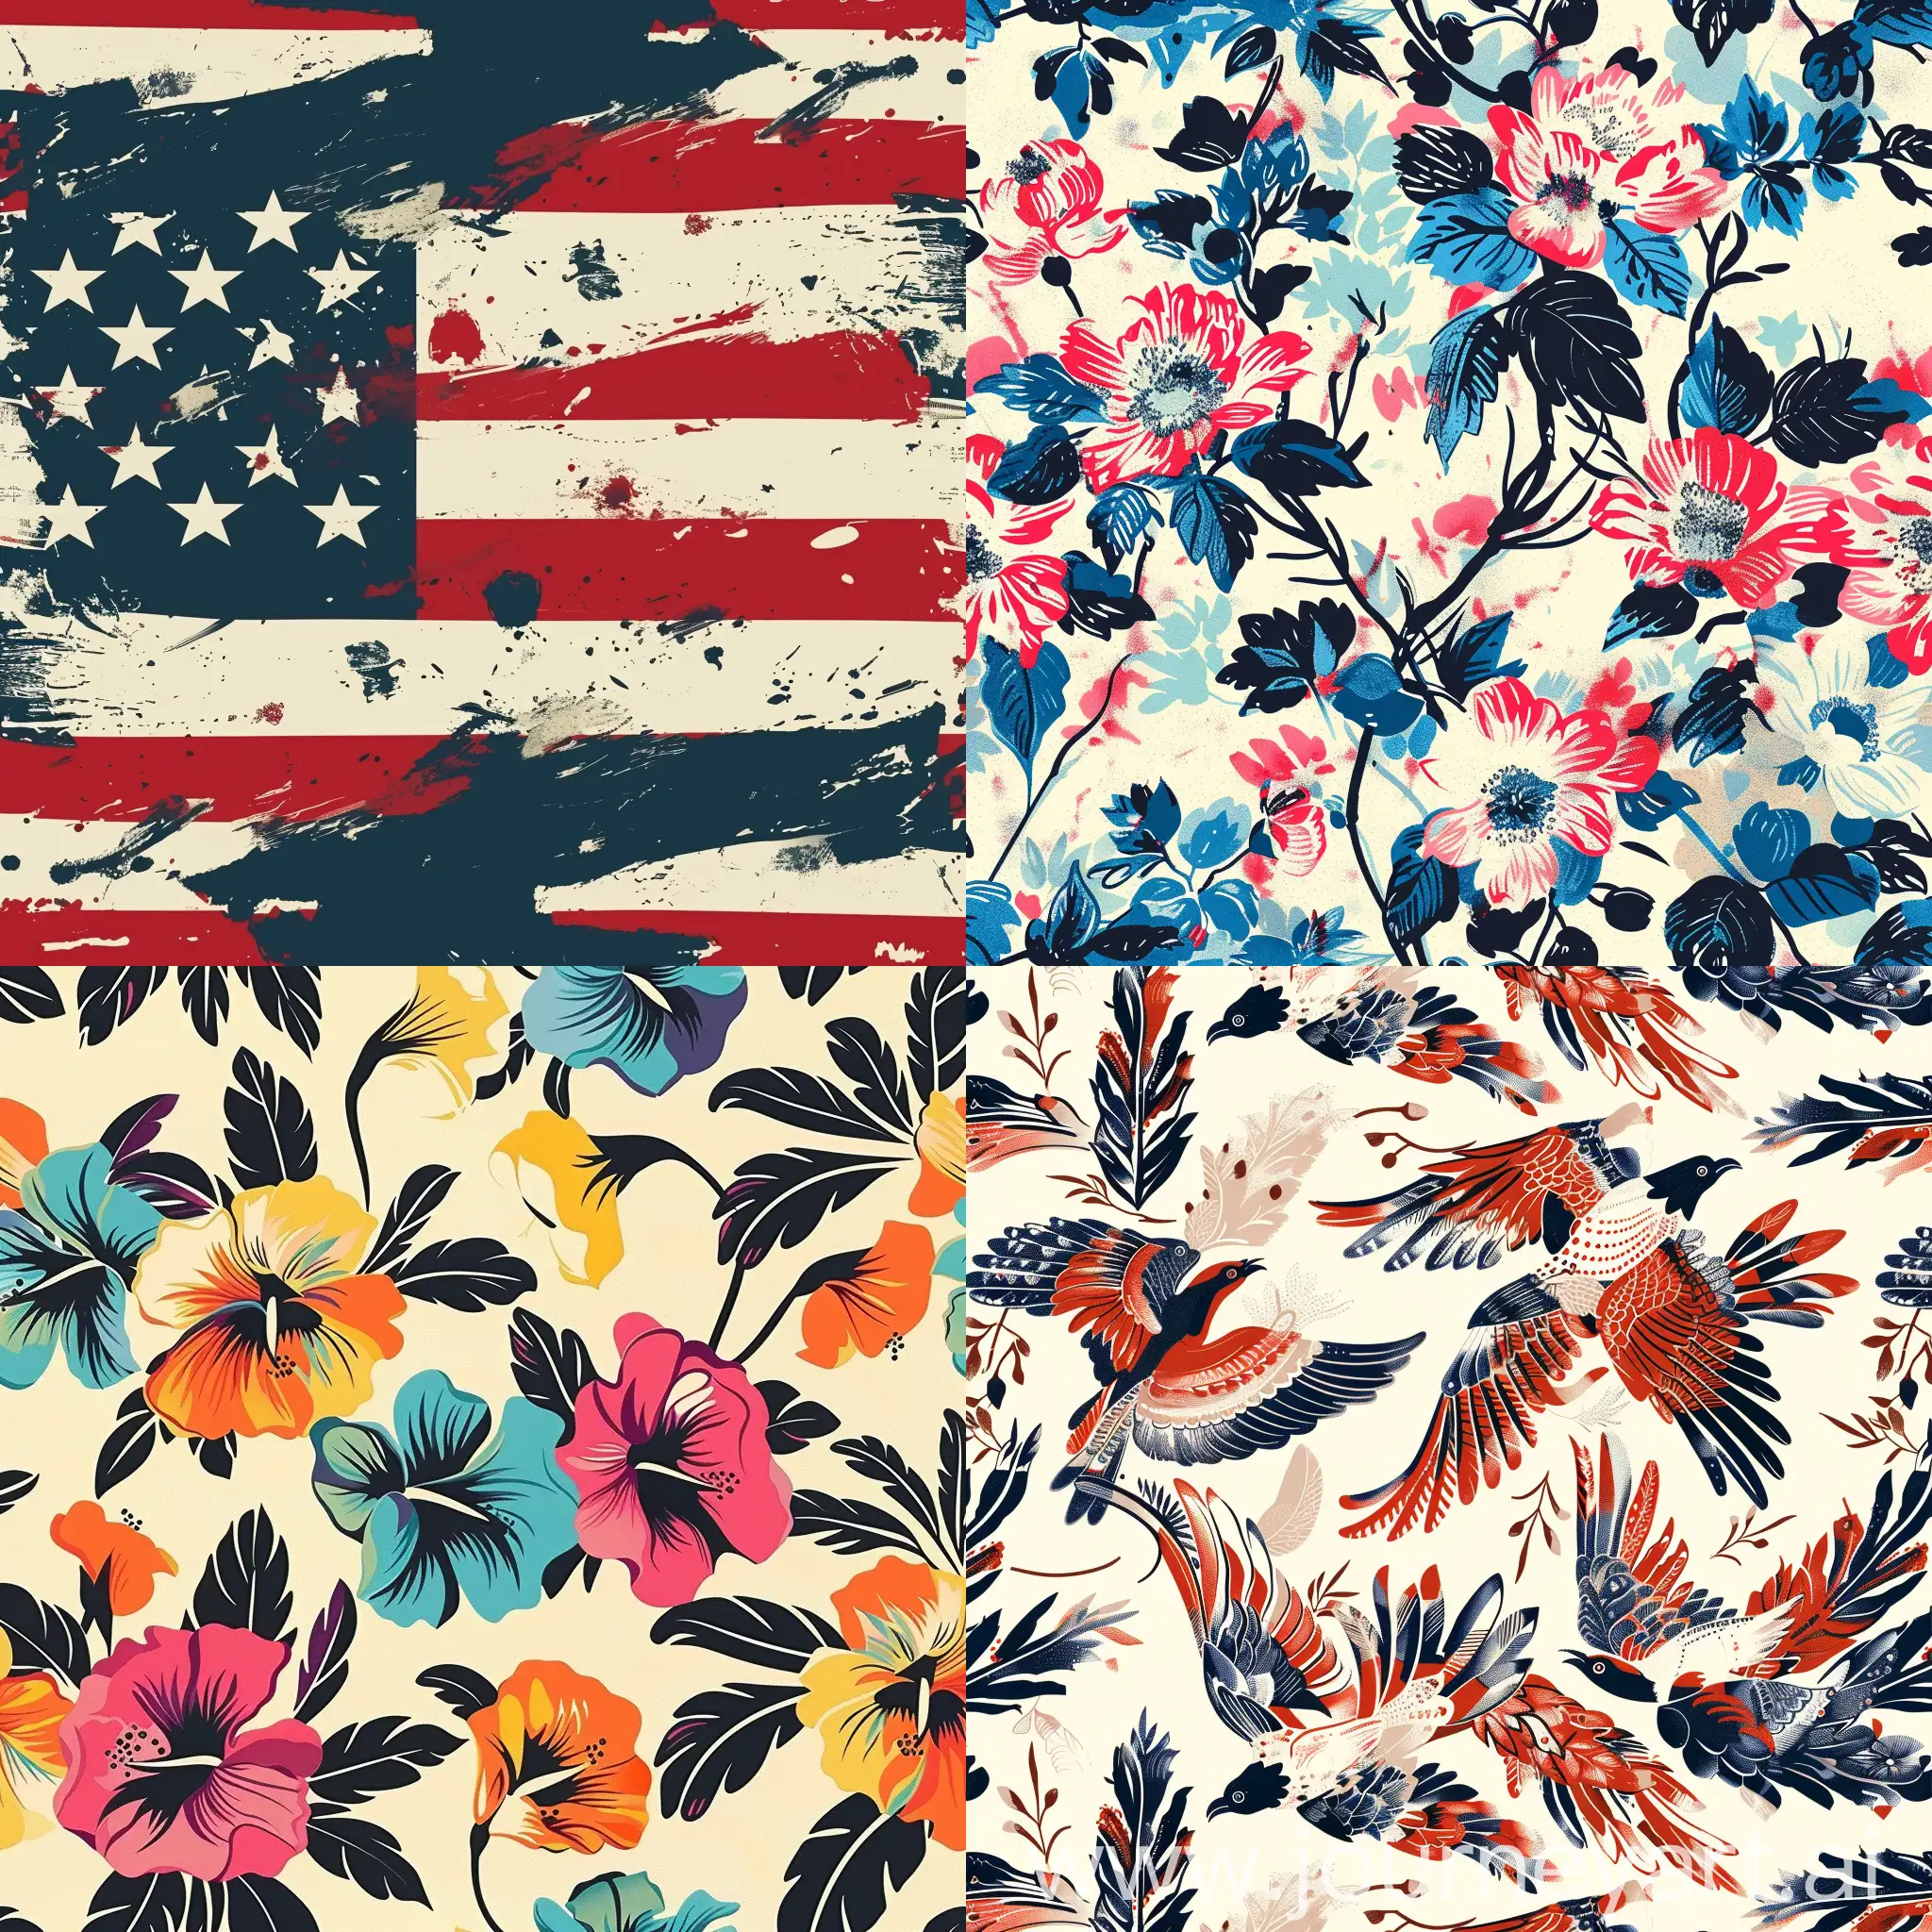 American-Style-Print-Patterns-on-Clothes-Vibrant-Design-Inspiration